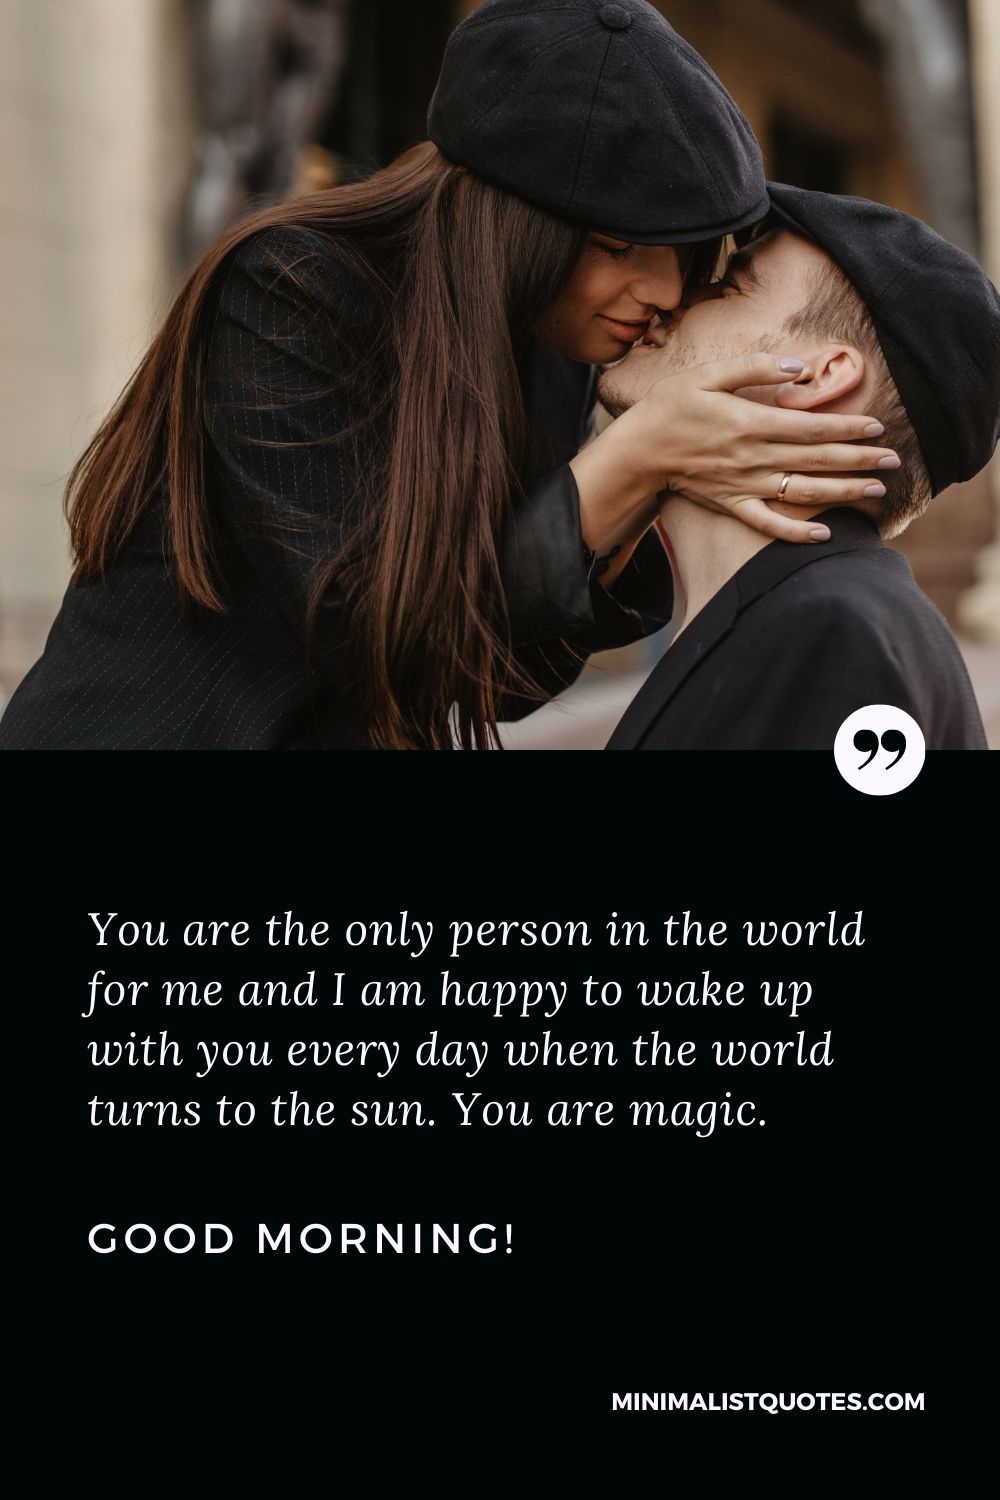 Good morning messages for her that touches the heart: You are the only person in the world for me and I am happy to wake up with you every day when the world turns to the sun. You are magic. Good Morning!